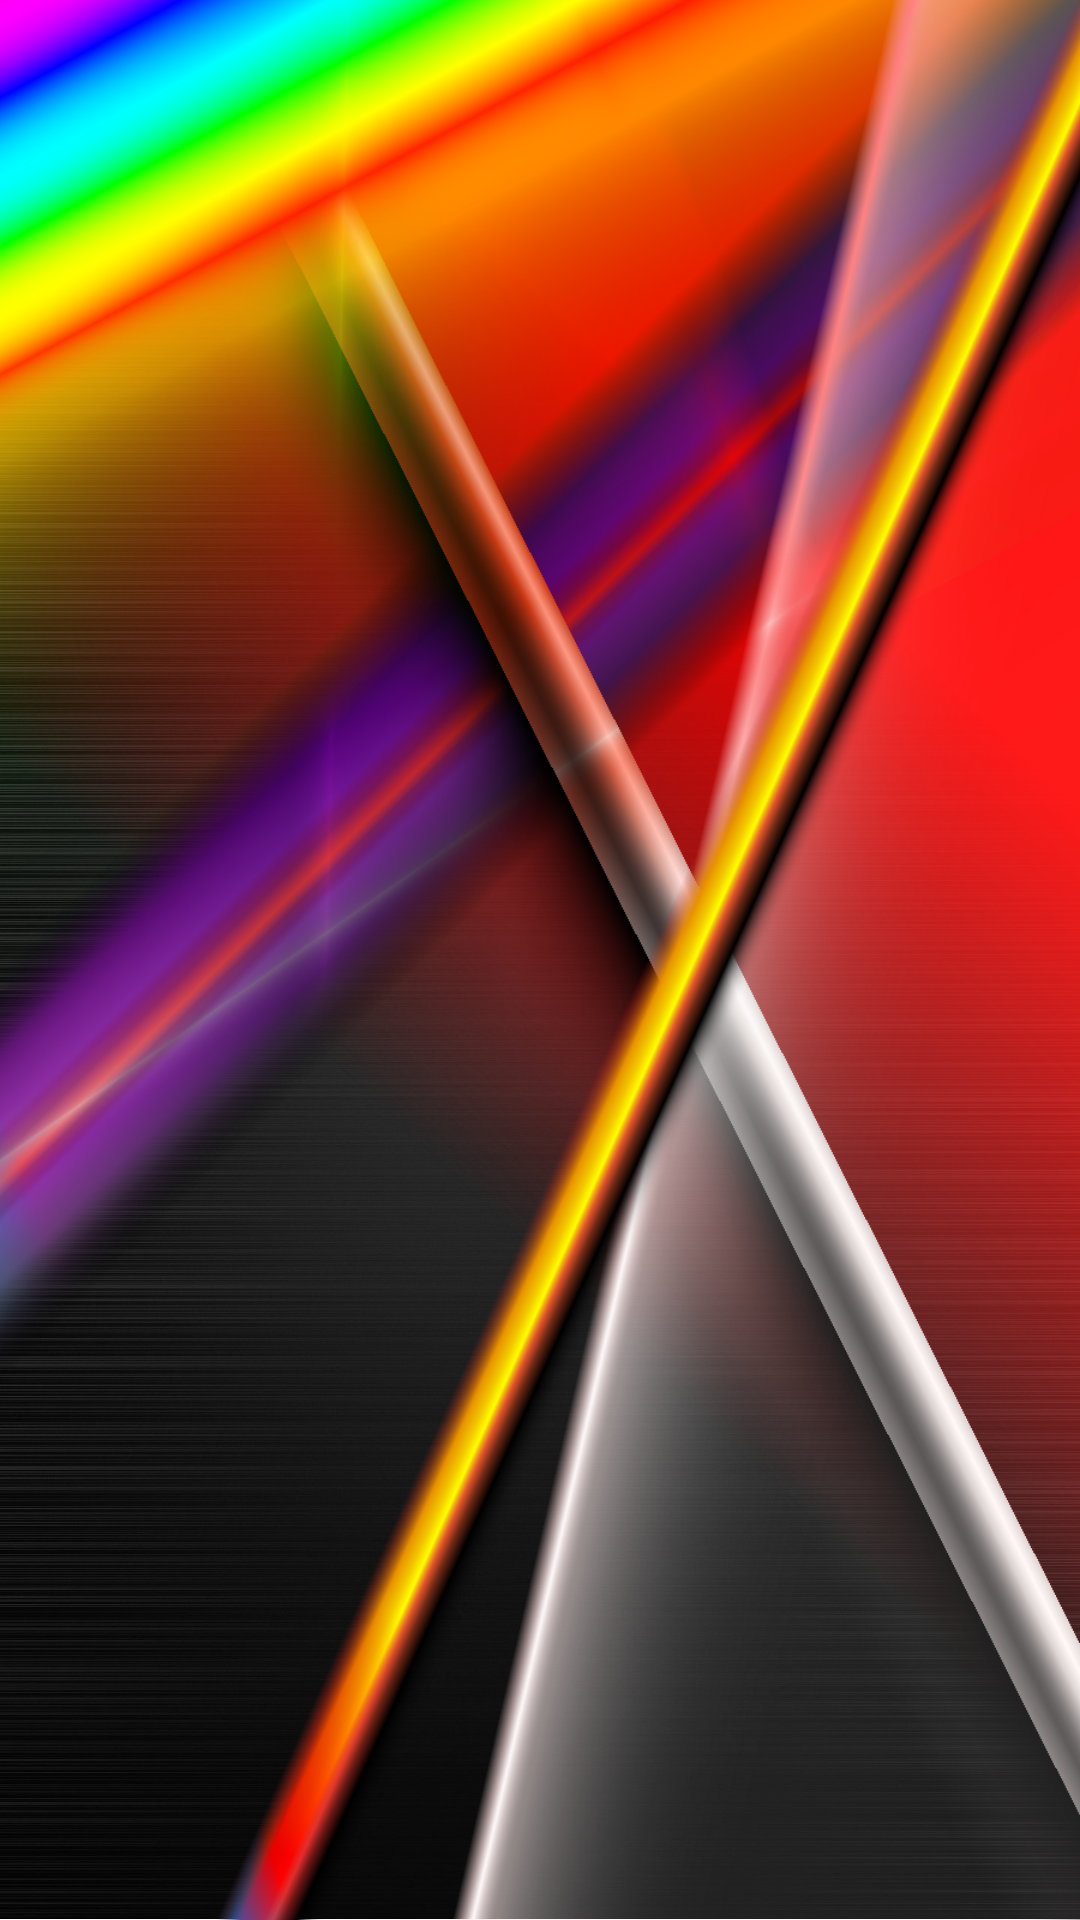 Wallpapers Samsung Galaxy Note 3 - Pack 003 - WallsPhone